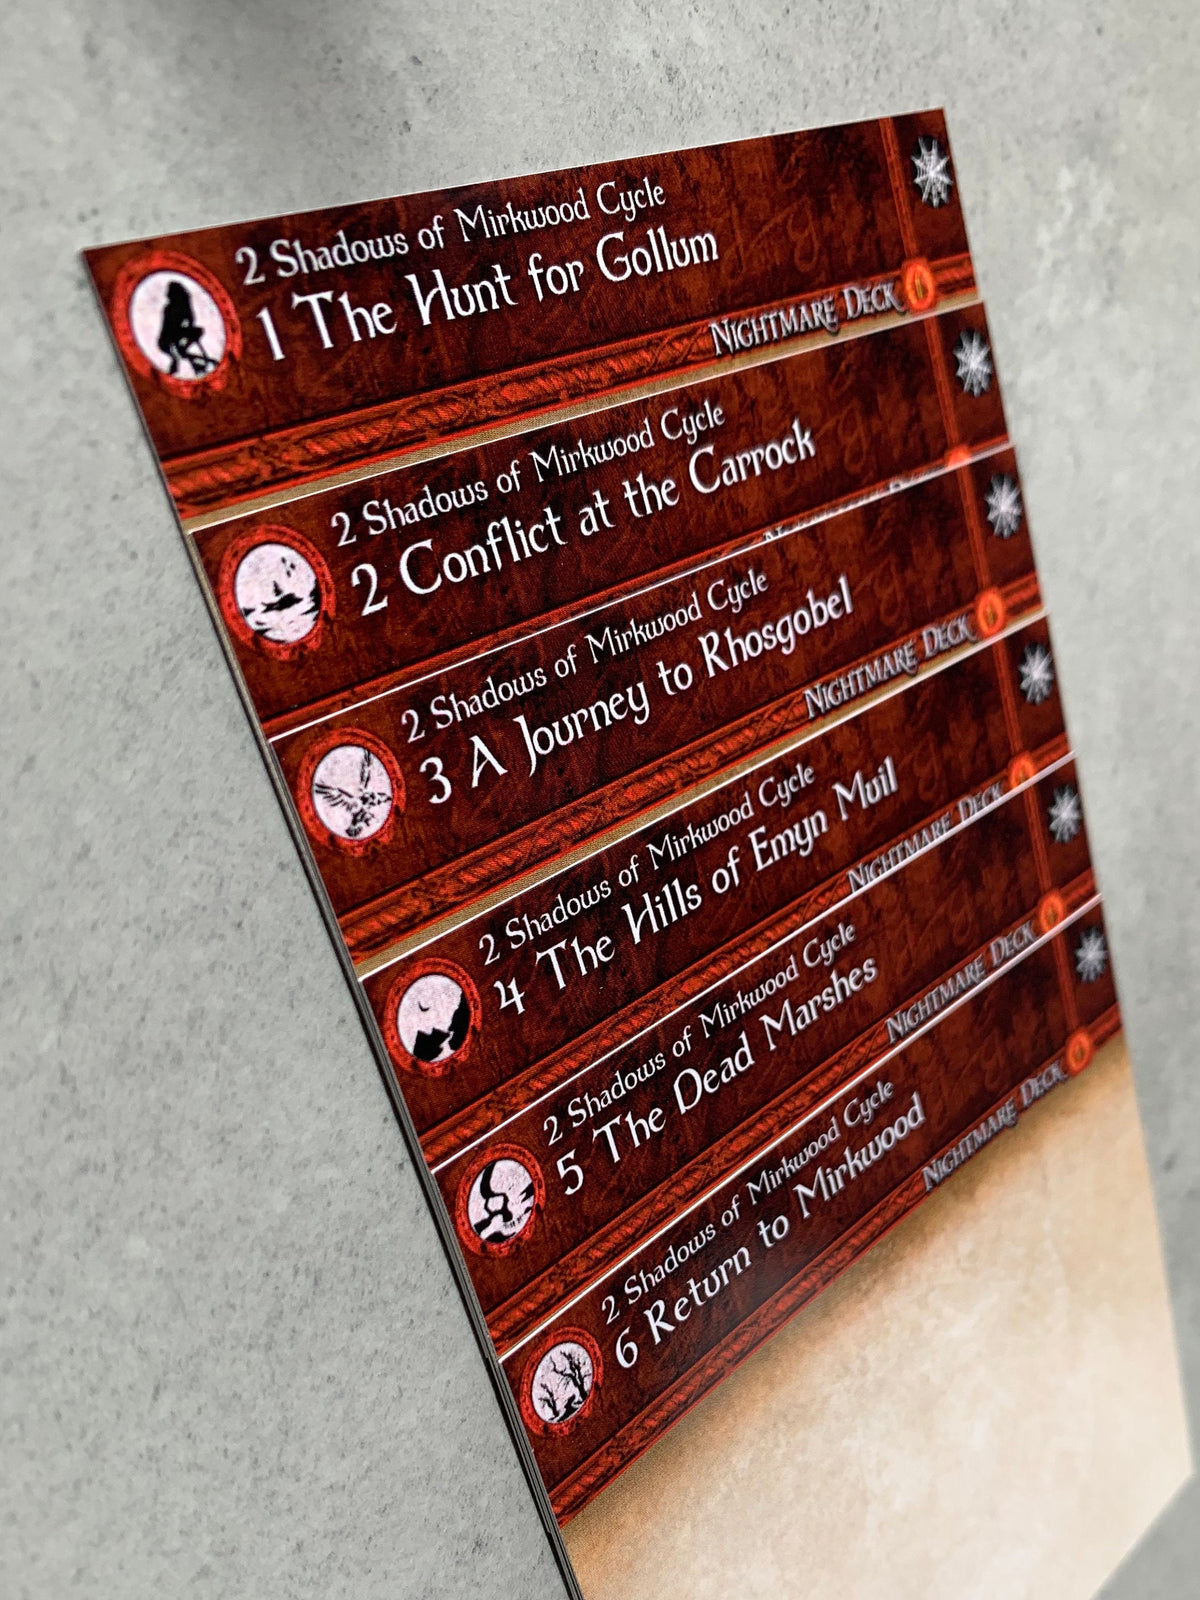 Lord of the Rings: The Card Game LCG Deck Box Dividers